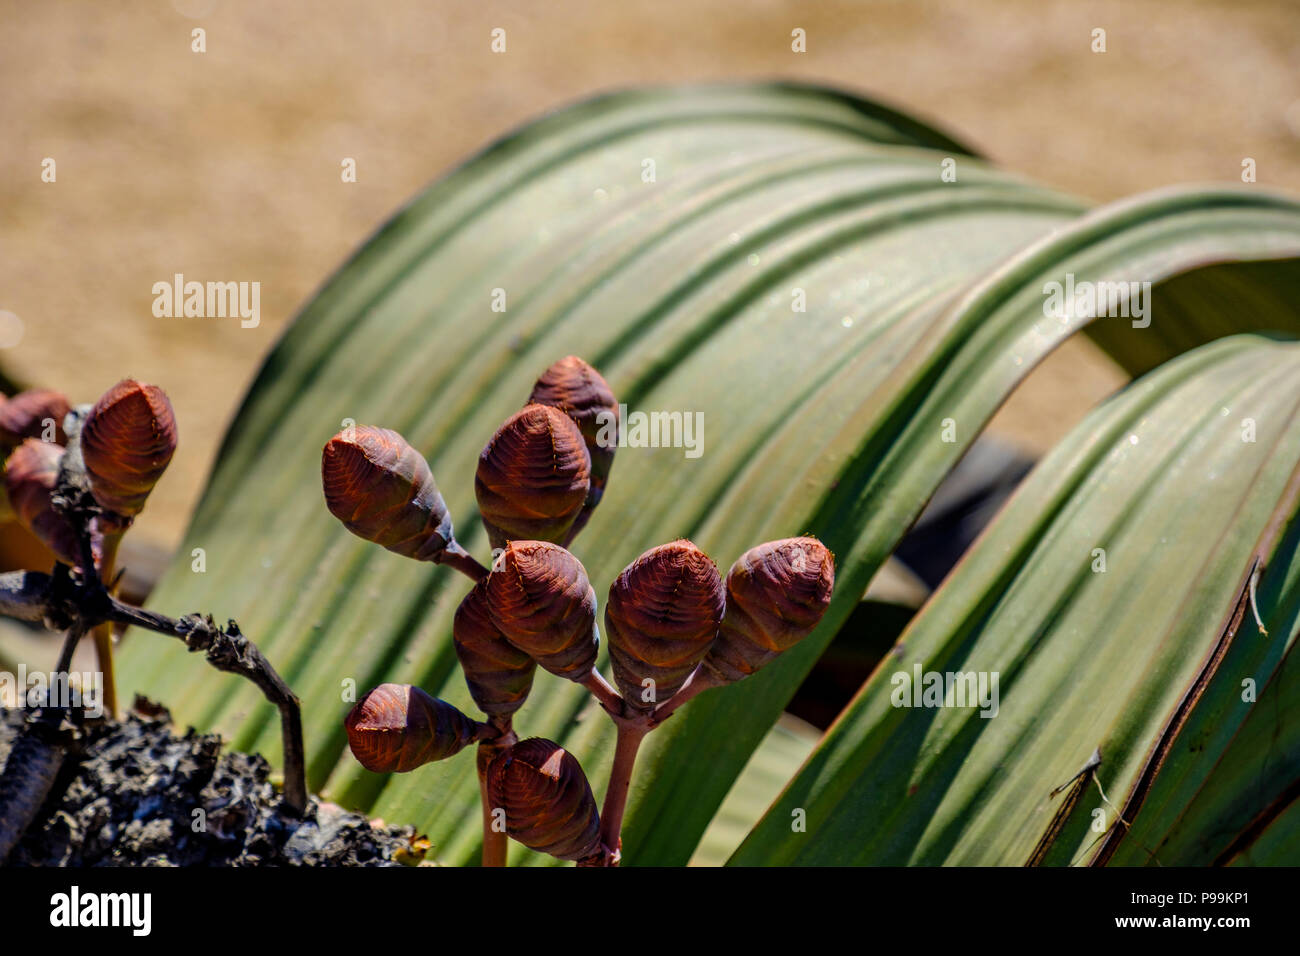 Close up of female cones and large leaves of the unique Welwitschia Mirabilis plant, native to Namibia against arid background of Namib desert Stock Photo